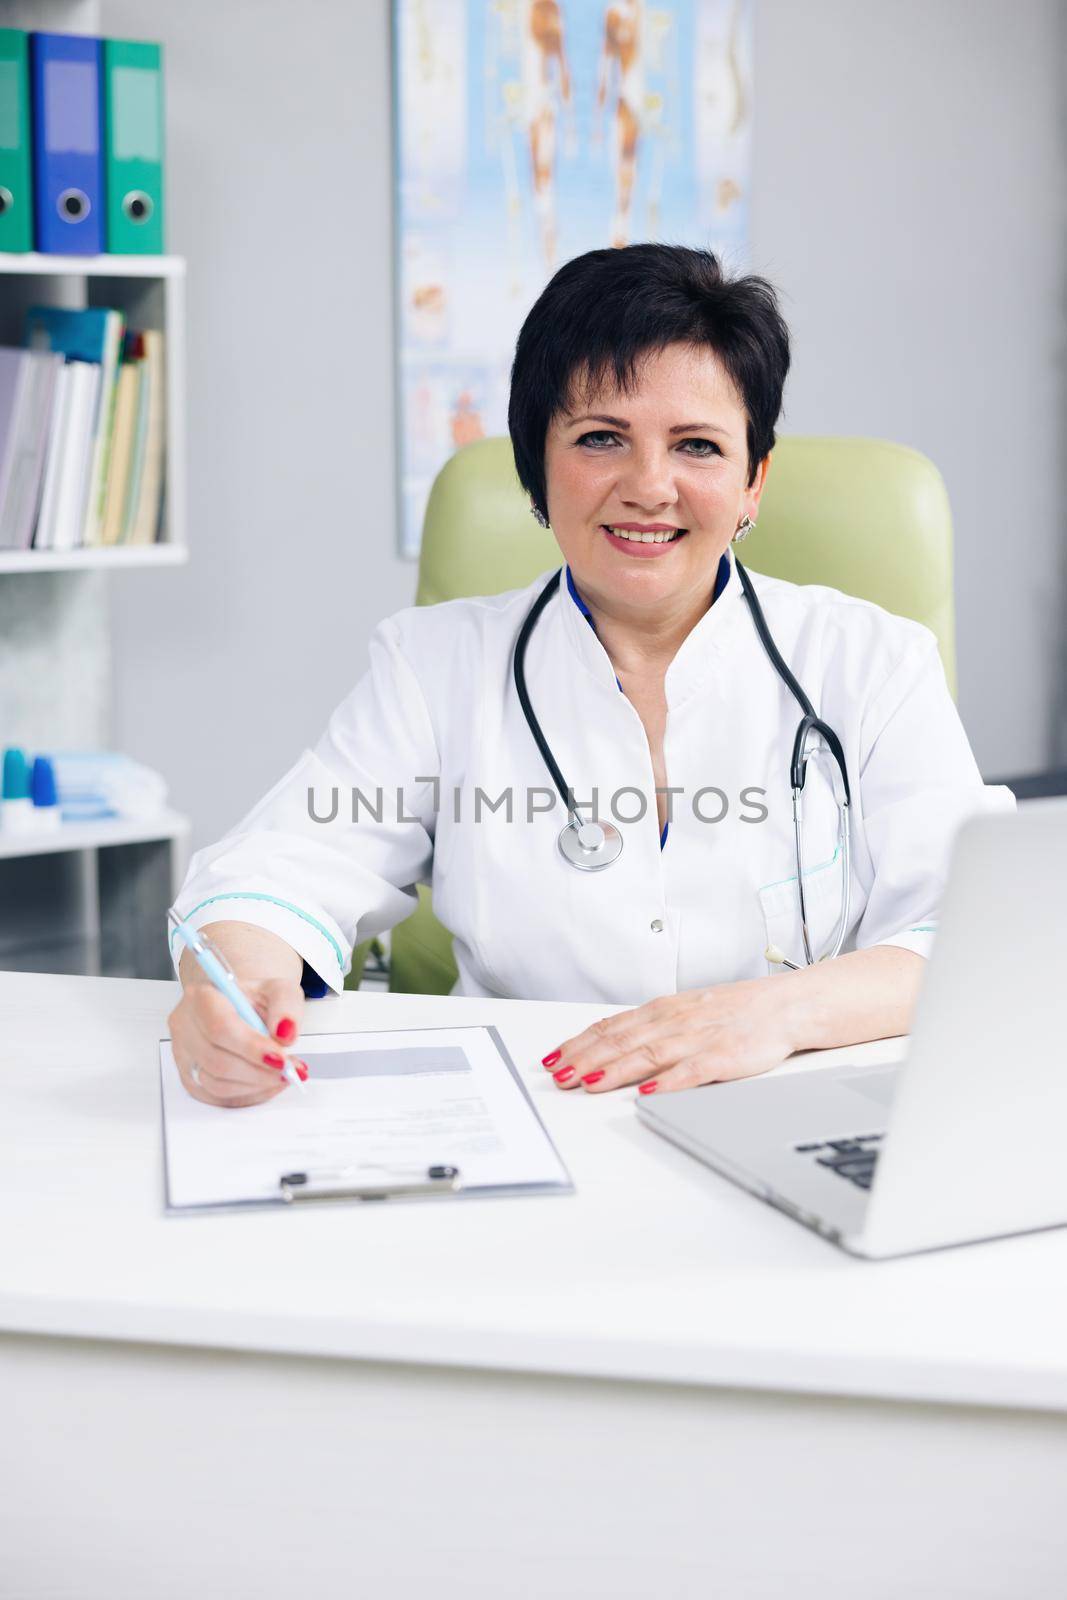 Confident woman wear white medical coat with stethoscope looking at camera. Happy lady professional medic clinic staff female nurse or doctor posing for close up portrait.